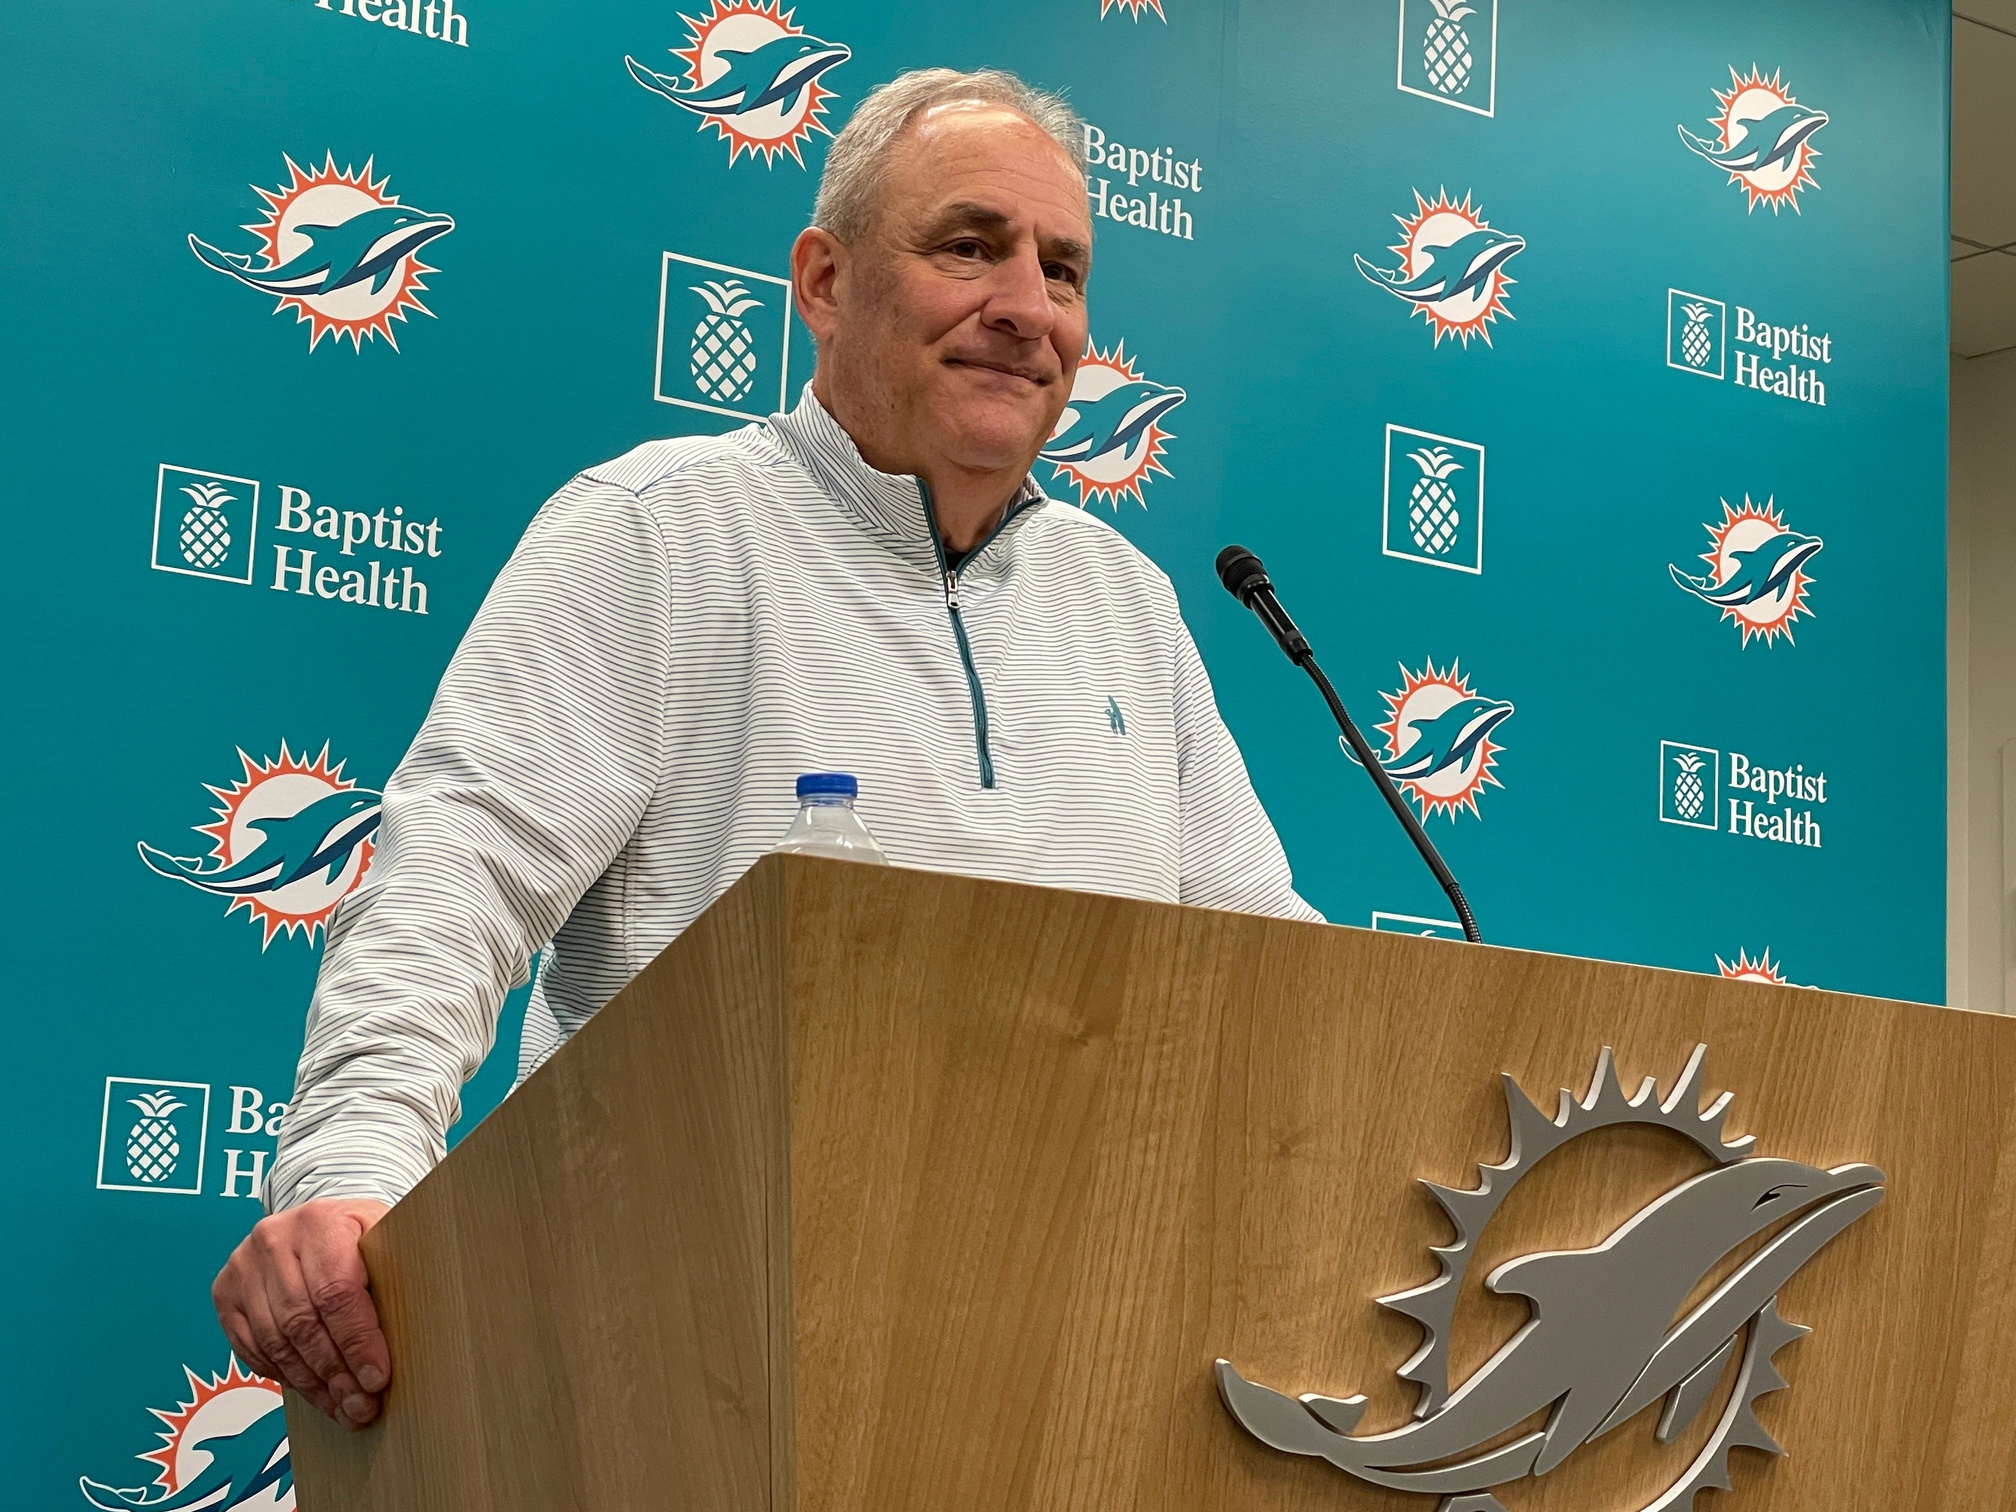 Report: Dolphins already talking daily about Super Bowl